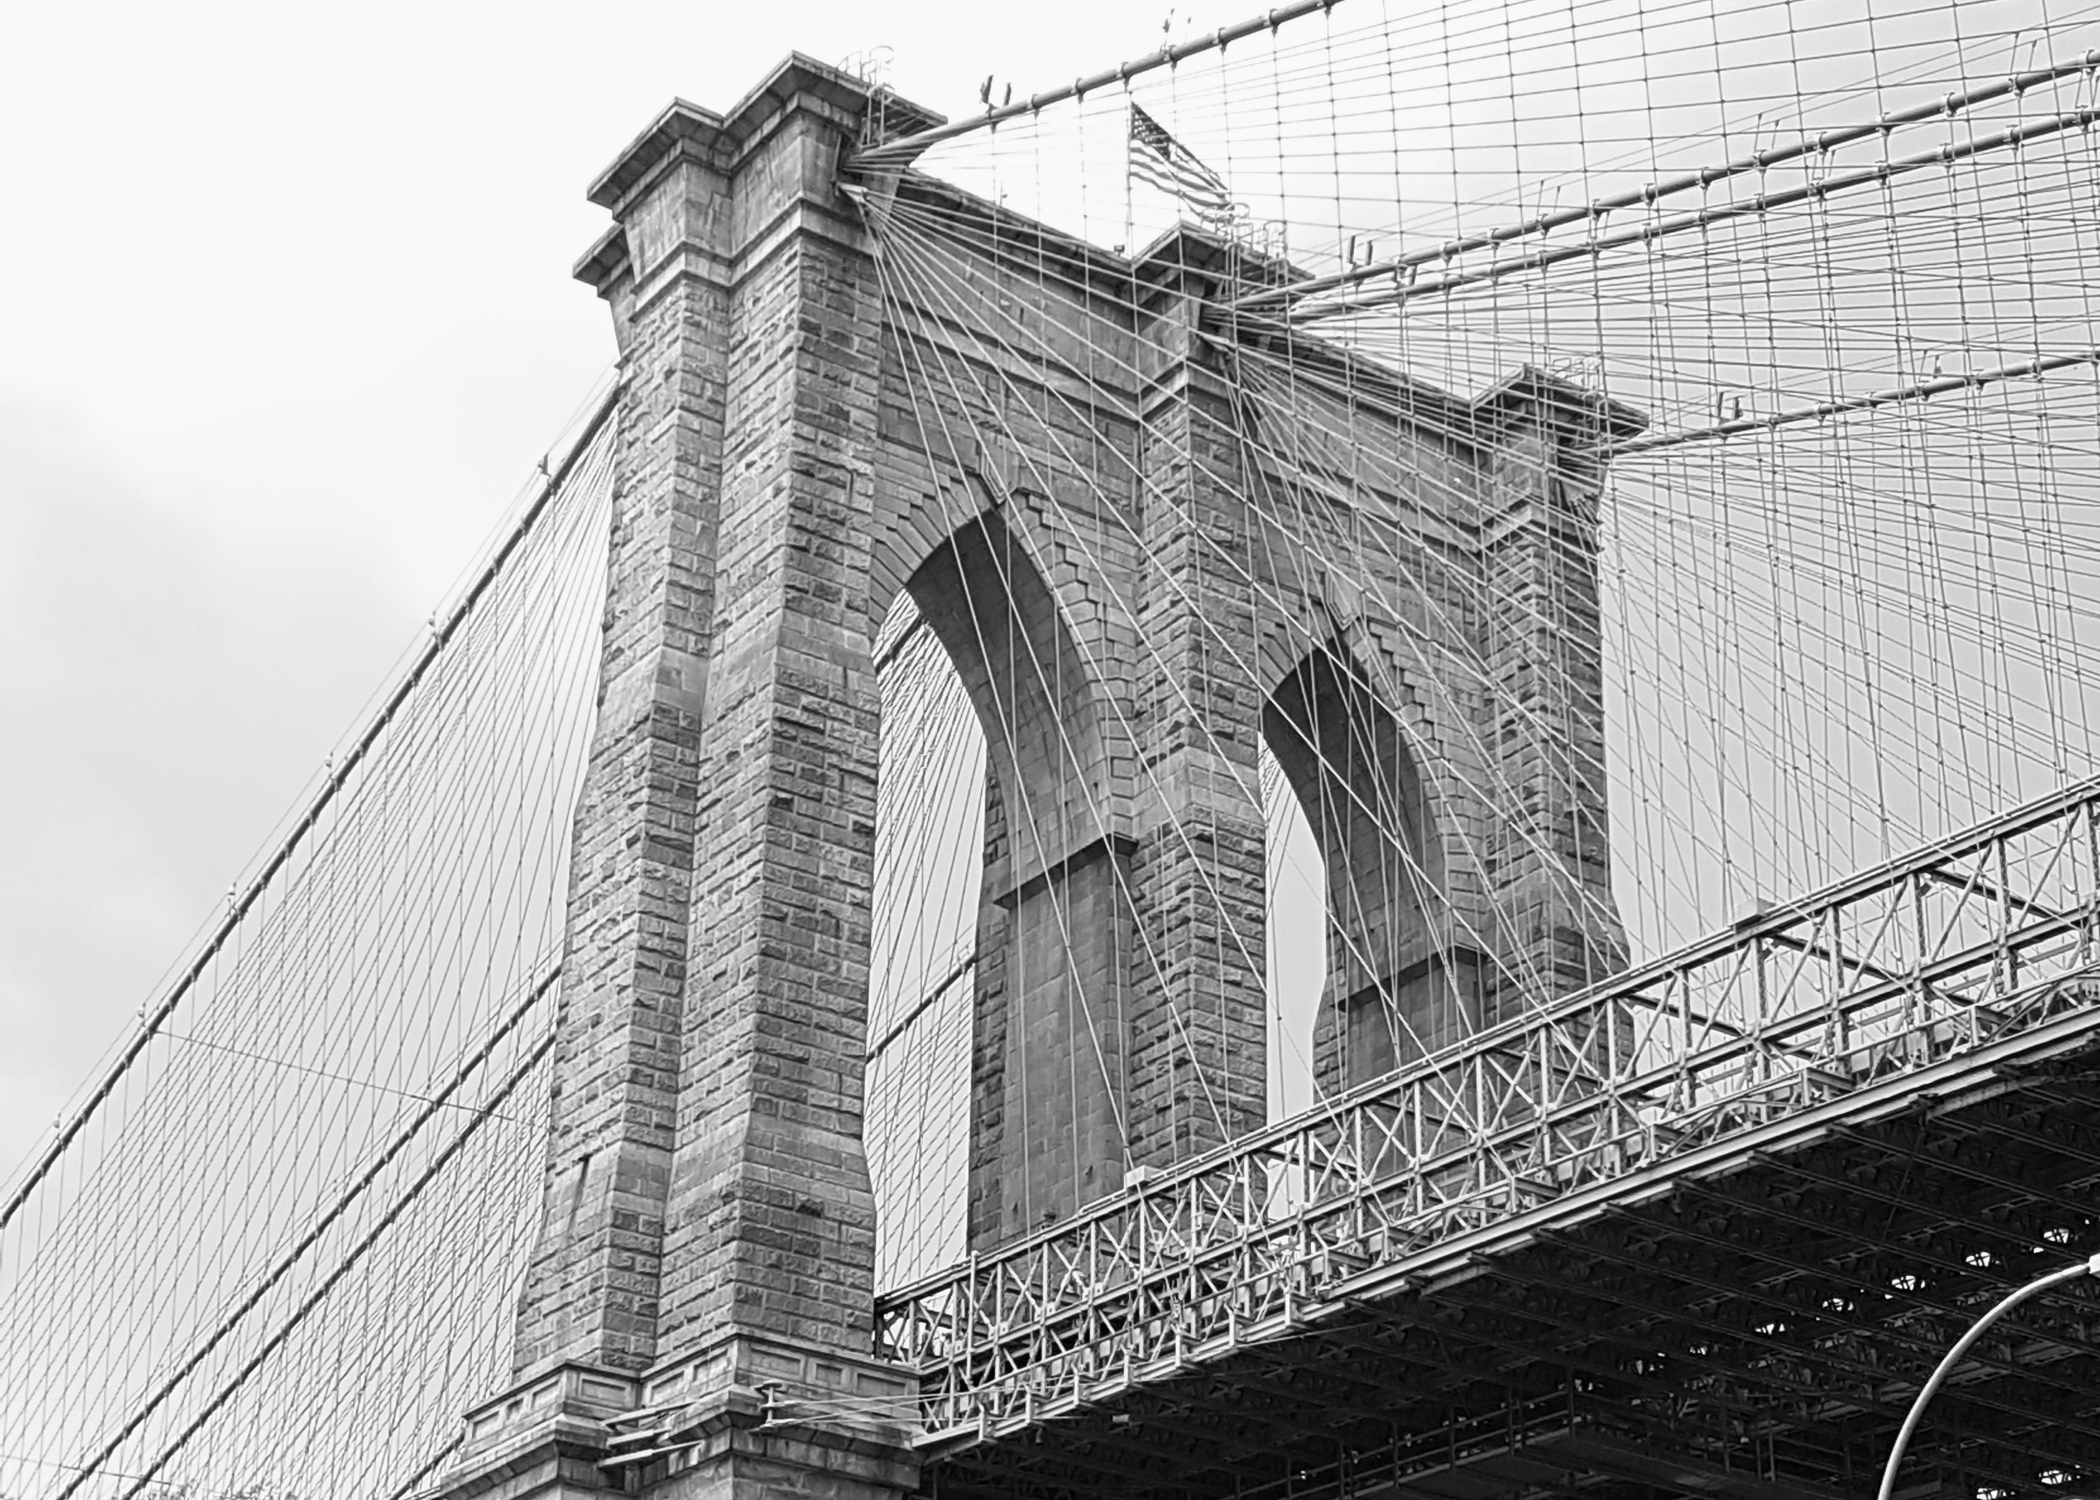 One of my favorite sights at home, the Brooklyn Bridge